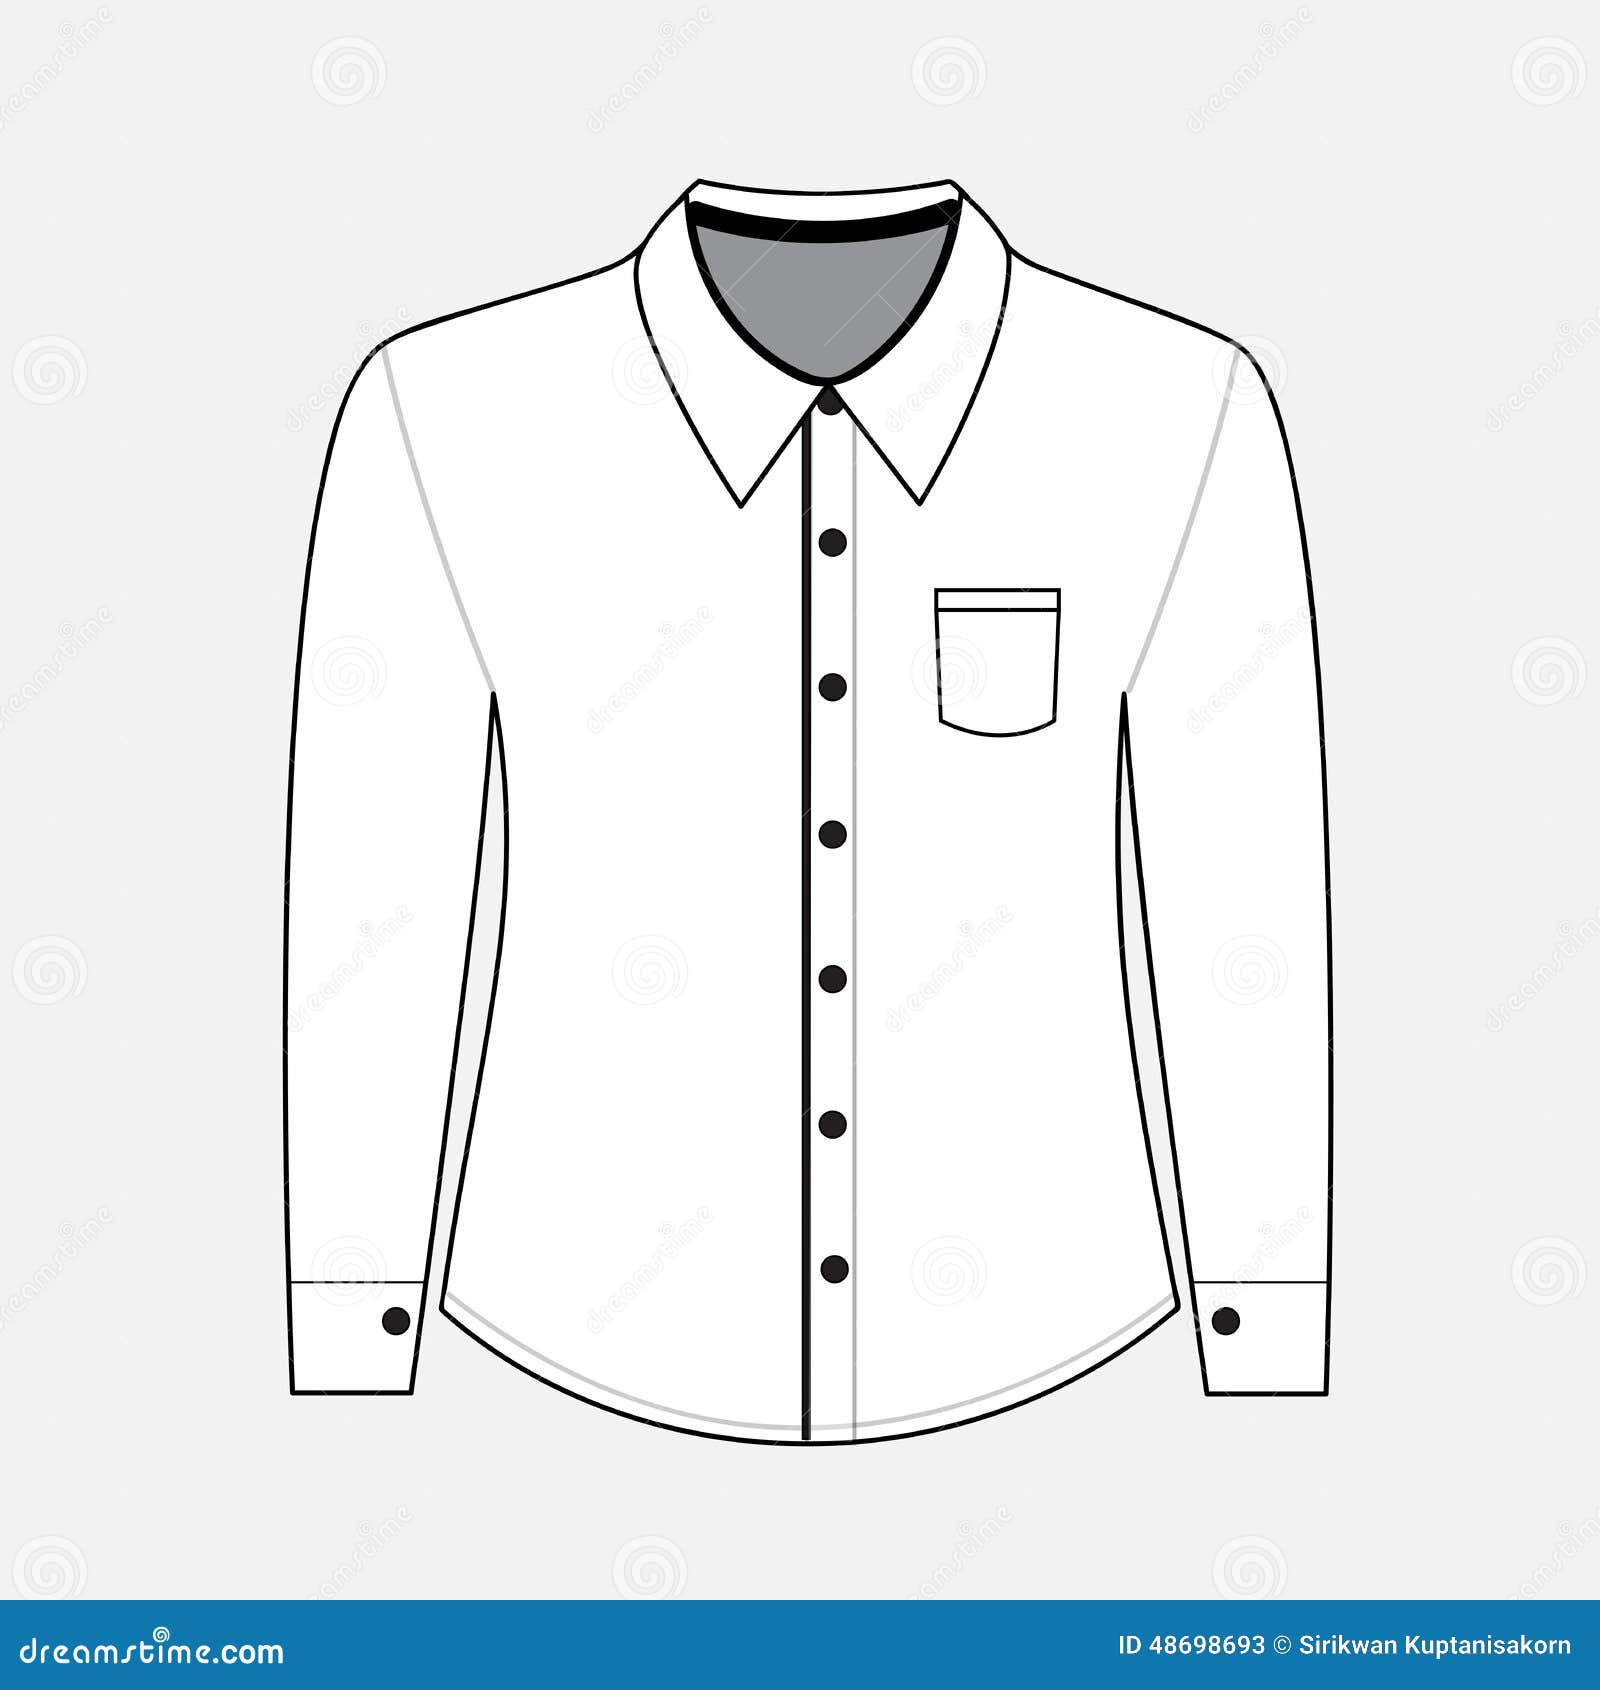 Shirt with long sleeves stock illustration. Illustration of apparel ...